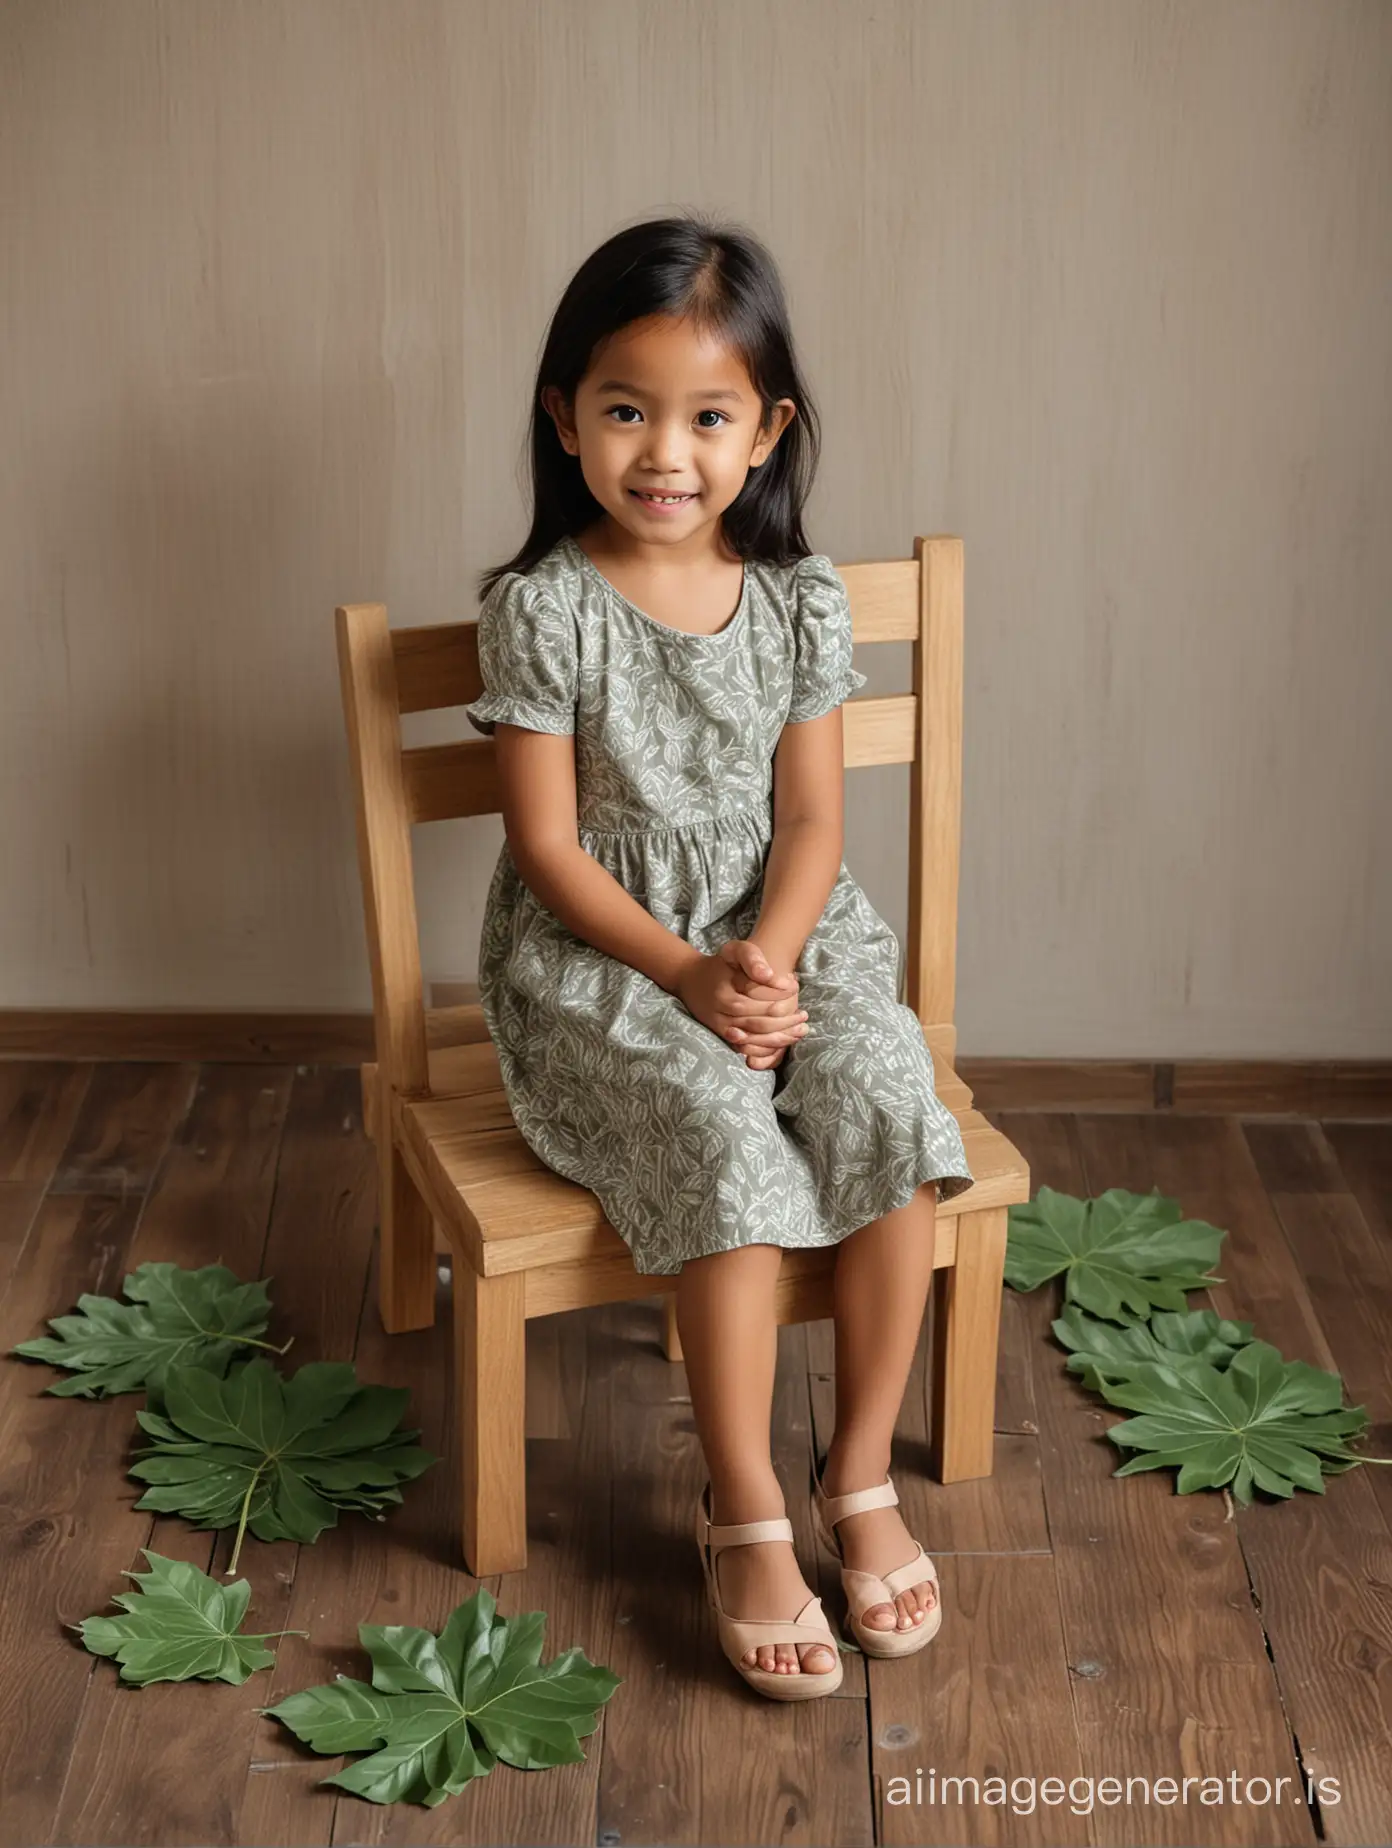 A six year old Indonesian girl sit on the Wood chair. Interior Wood feel with leaves on the wooden floor.